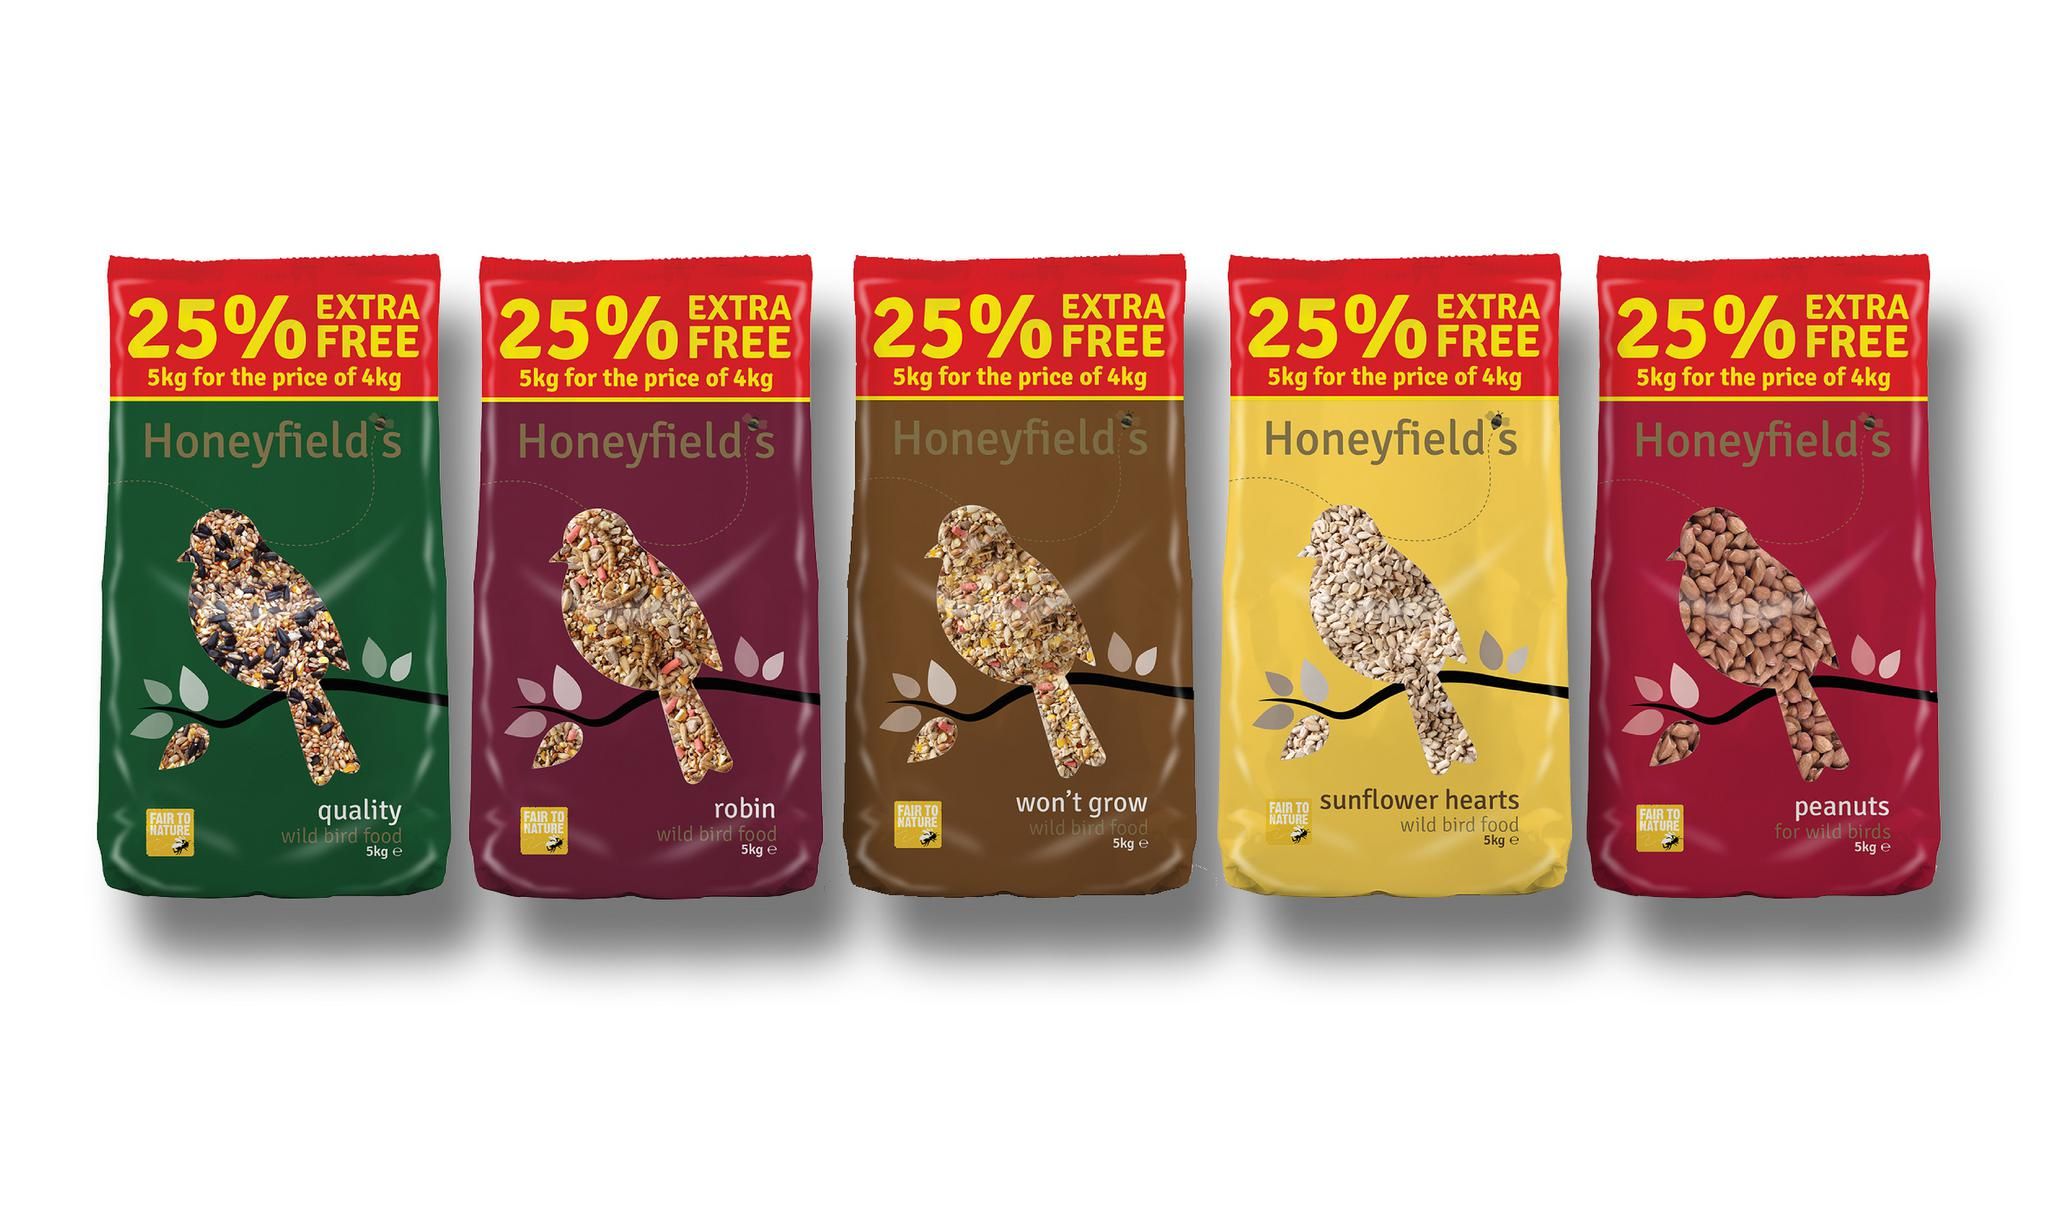 NEW 5kg Bag Size From Honeyfield's